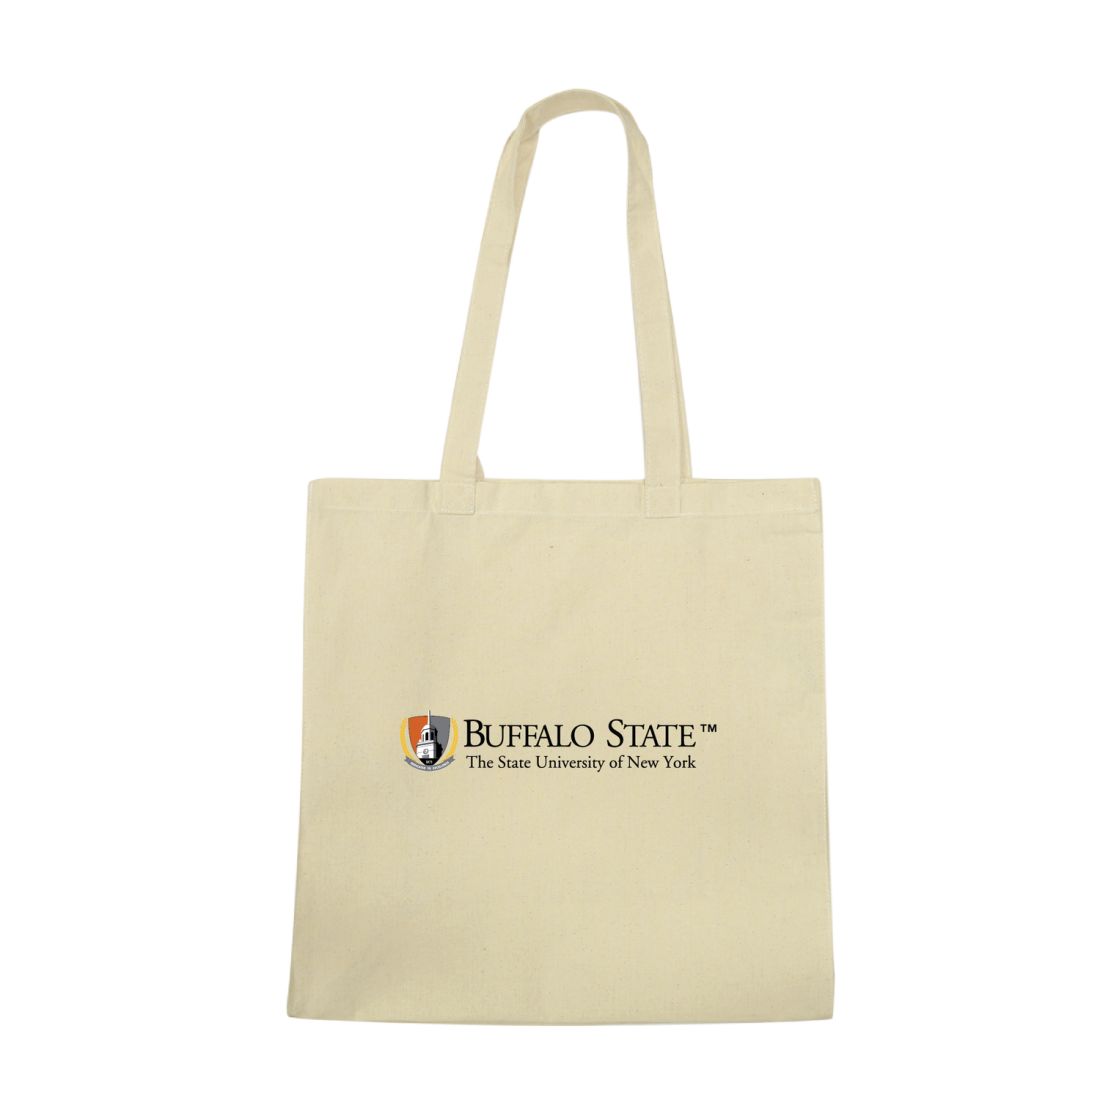 SUNY Buffalo State College Bengals Institutional Tote Bag